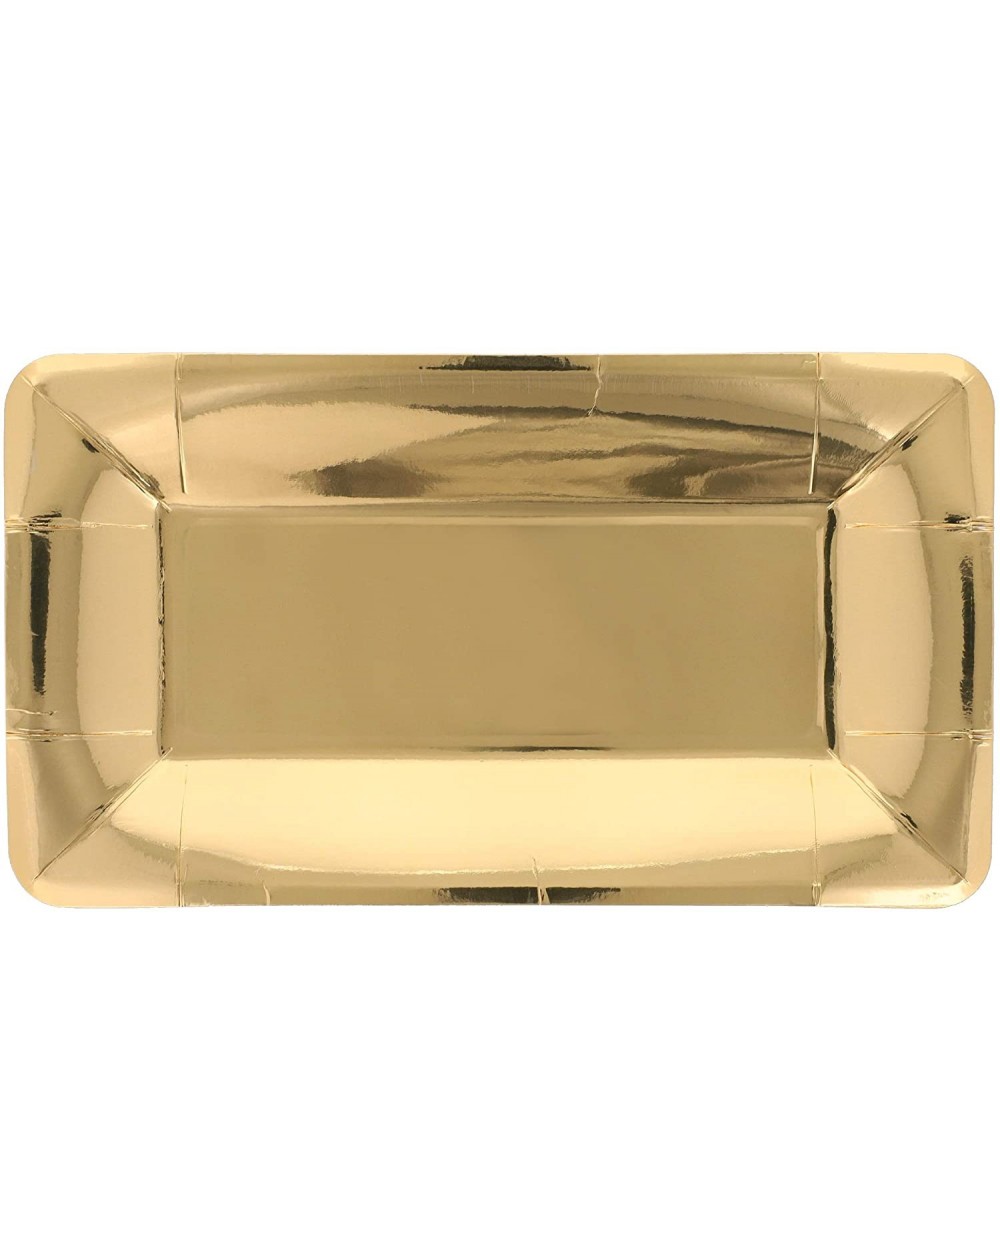 Tableware Gold Appetizer Plates (9 x 5 In- 24 Pack) - CQ18QCW4MOX $10.05